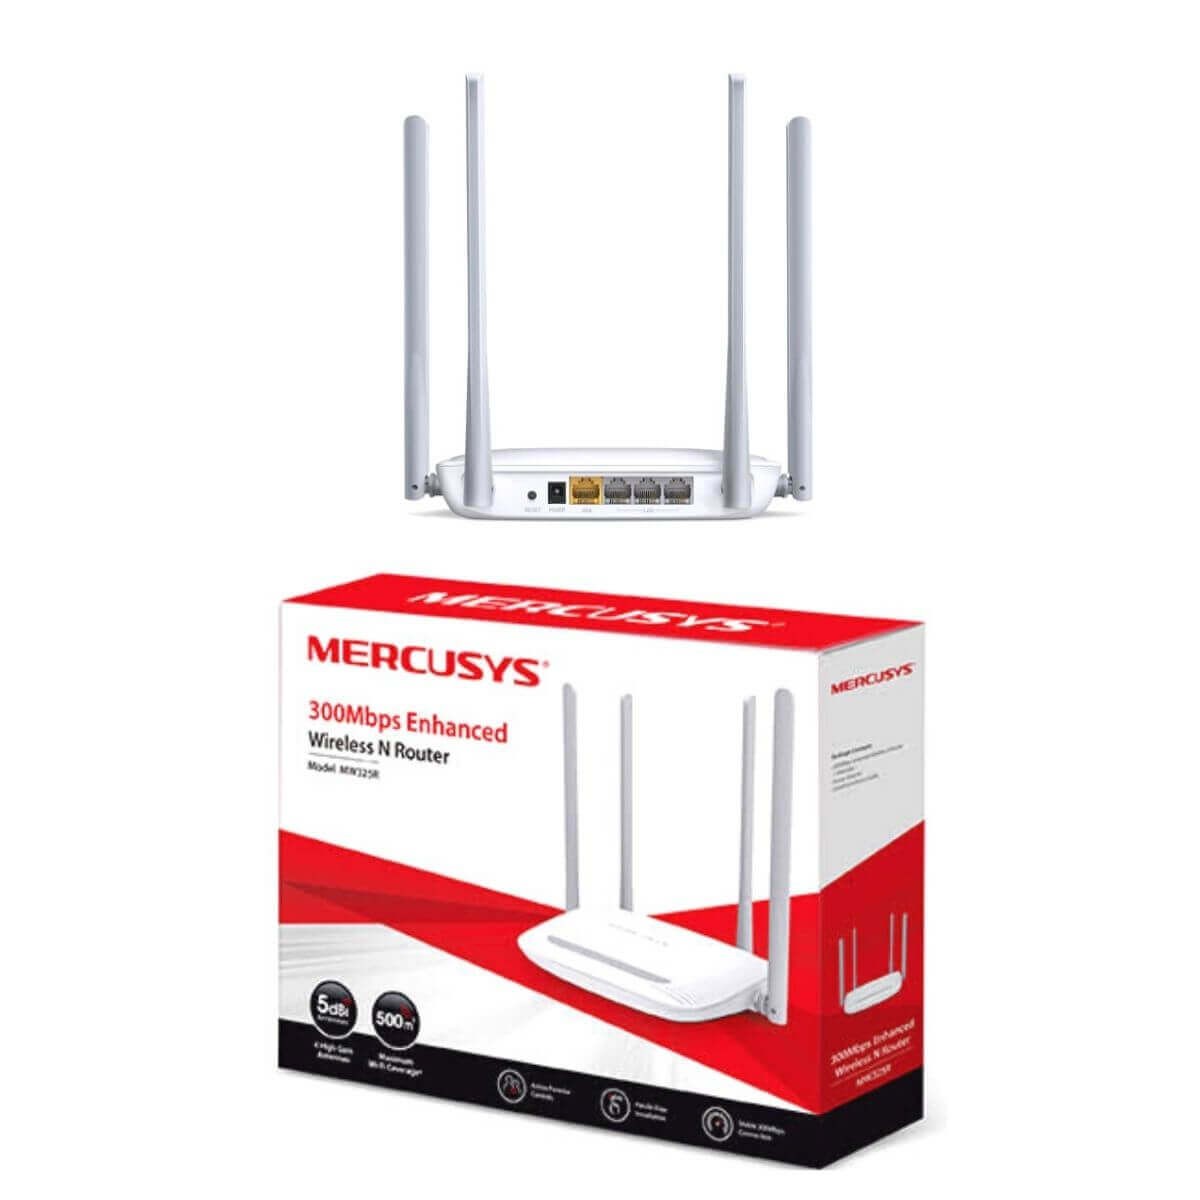 Mercusys MW325R 300Mbps Enhanced Wireless N Router BD